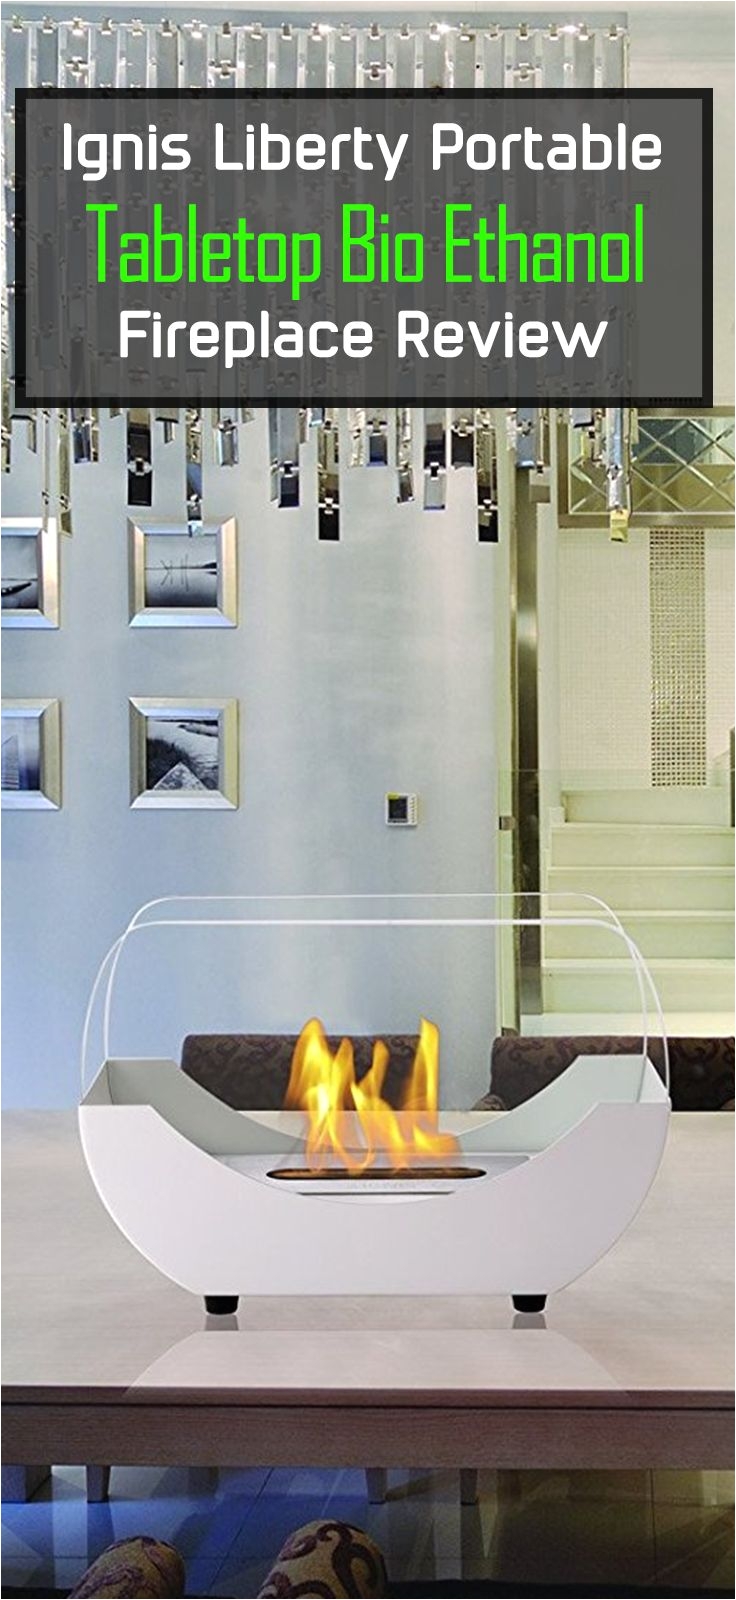 how does a water vapor fireplace work the 13 best portable fireplace images on pinterest fire places of how does a water vapor fireplace work